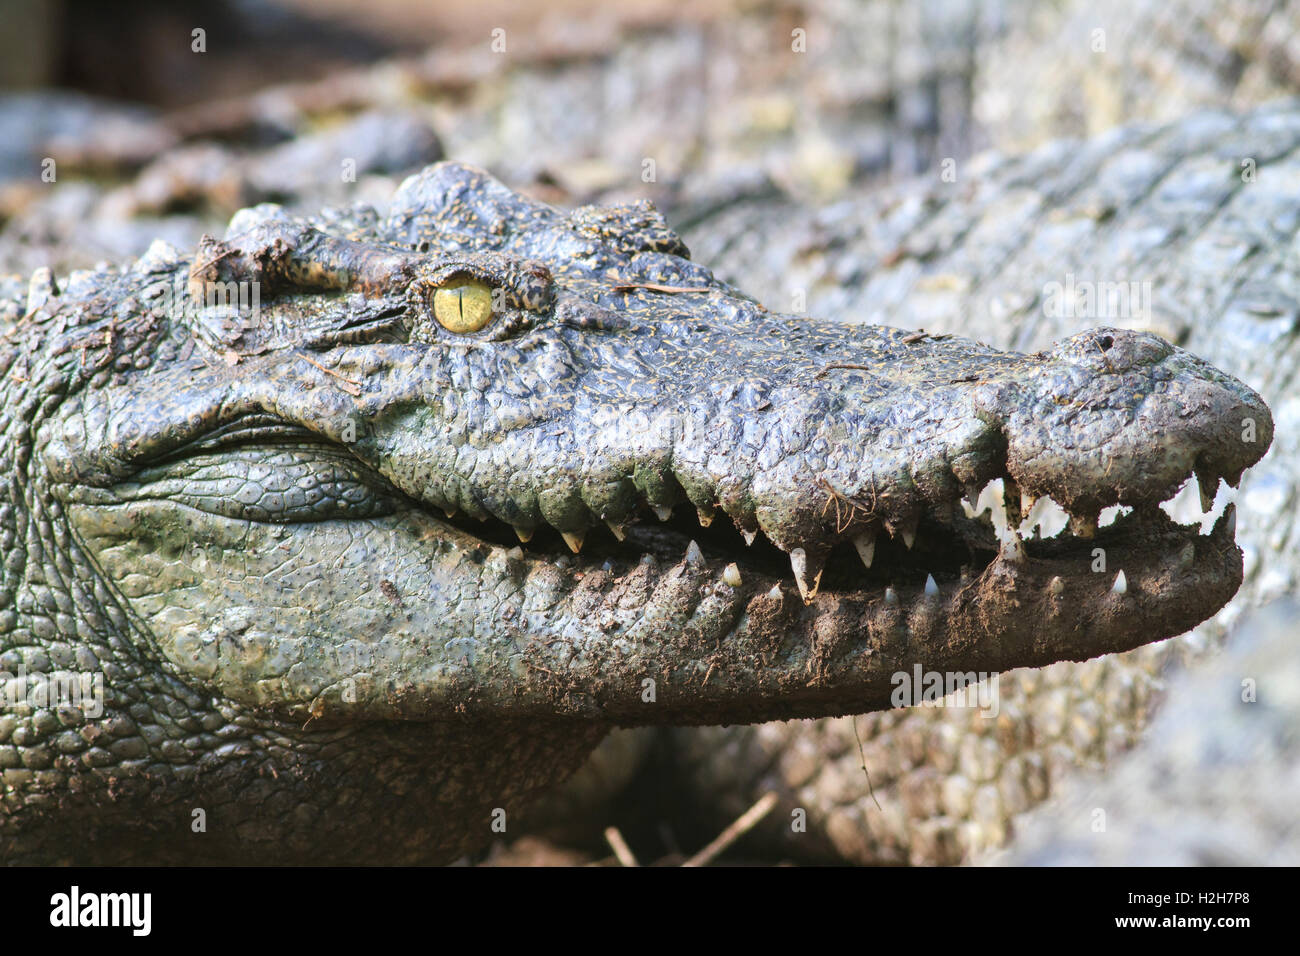 Closed up picture of crocodile and skin Stock Photo